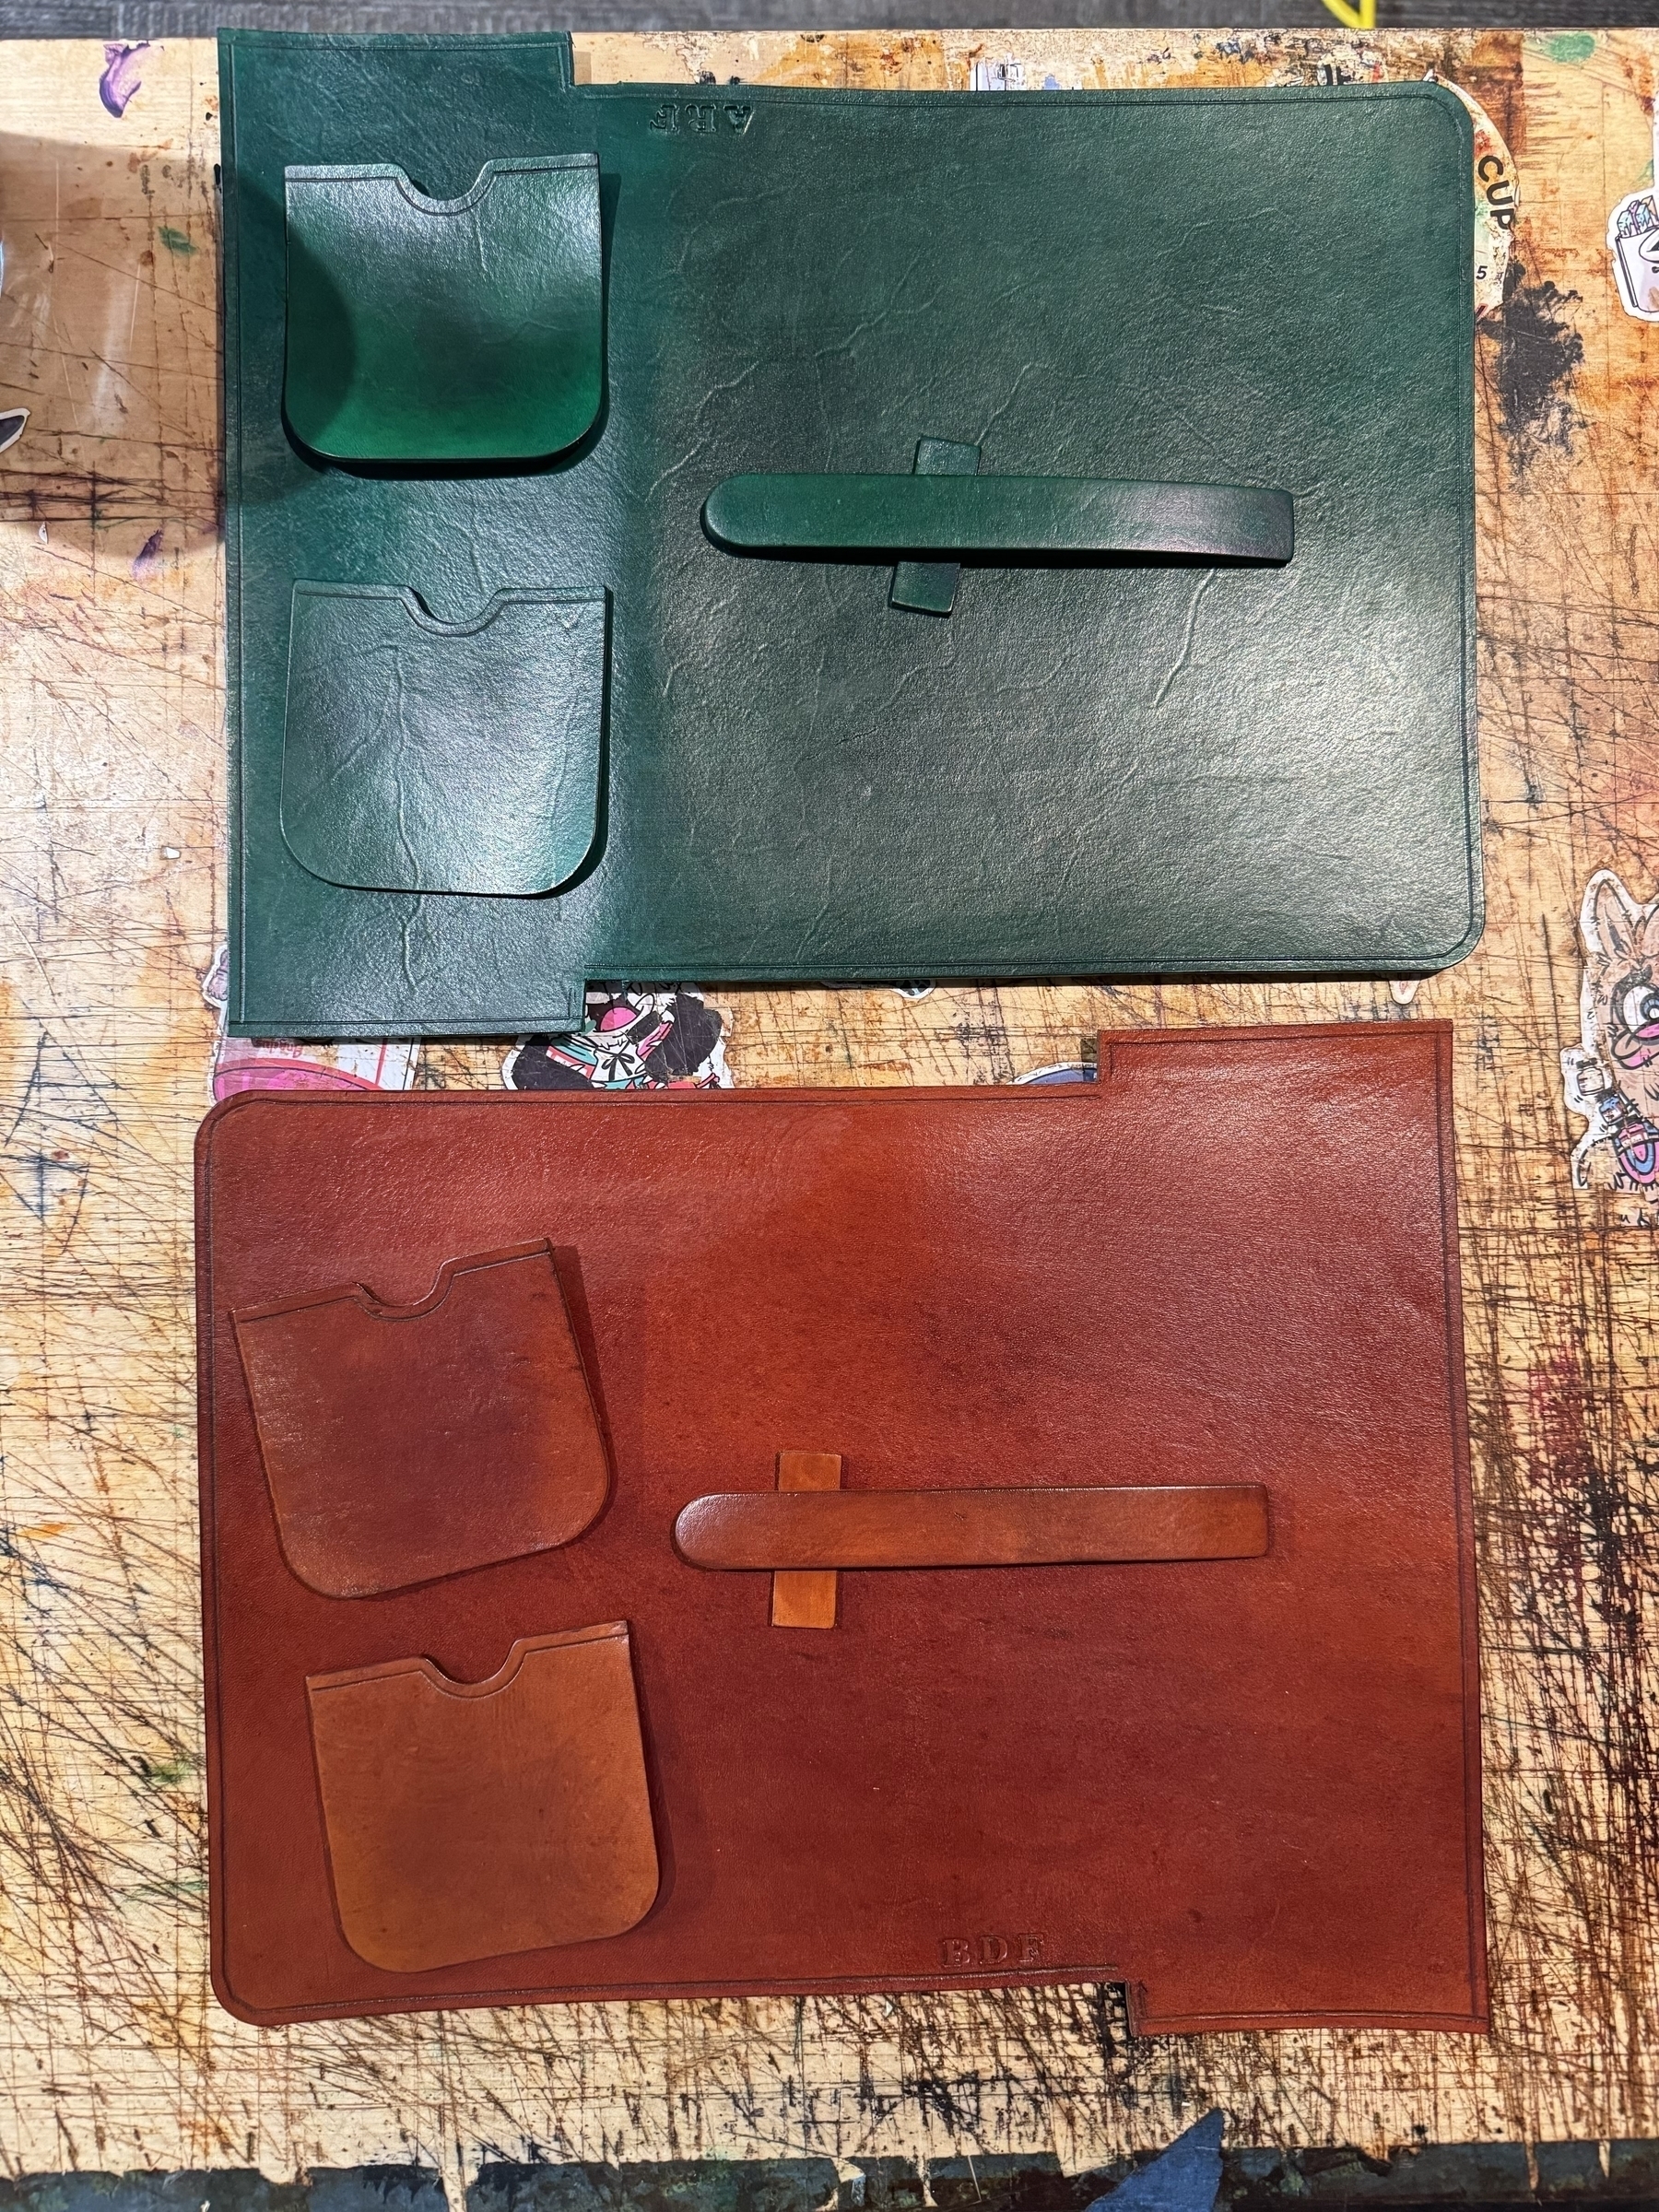 Two leather cigar cases, one green and one brown, are laid out on a wooden surface, each featuring a pair of pockets and a strap.